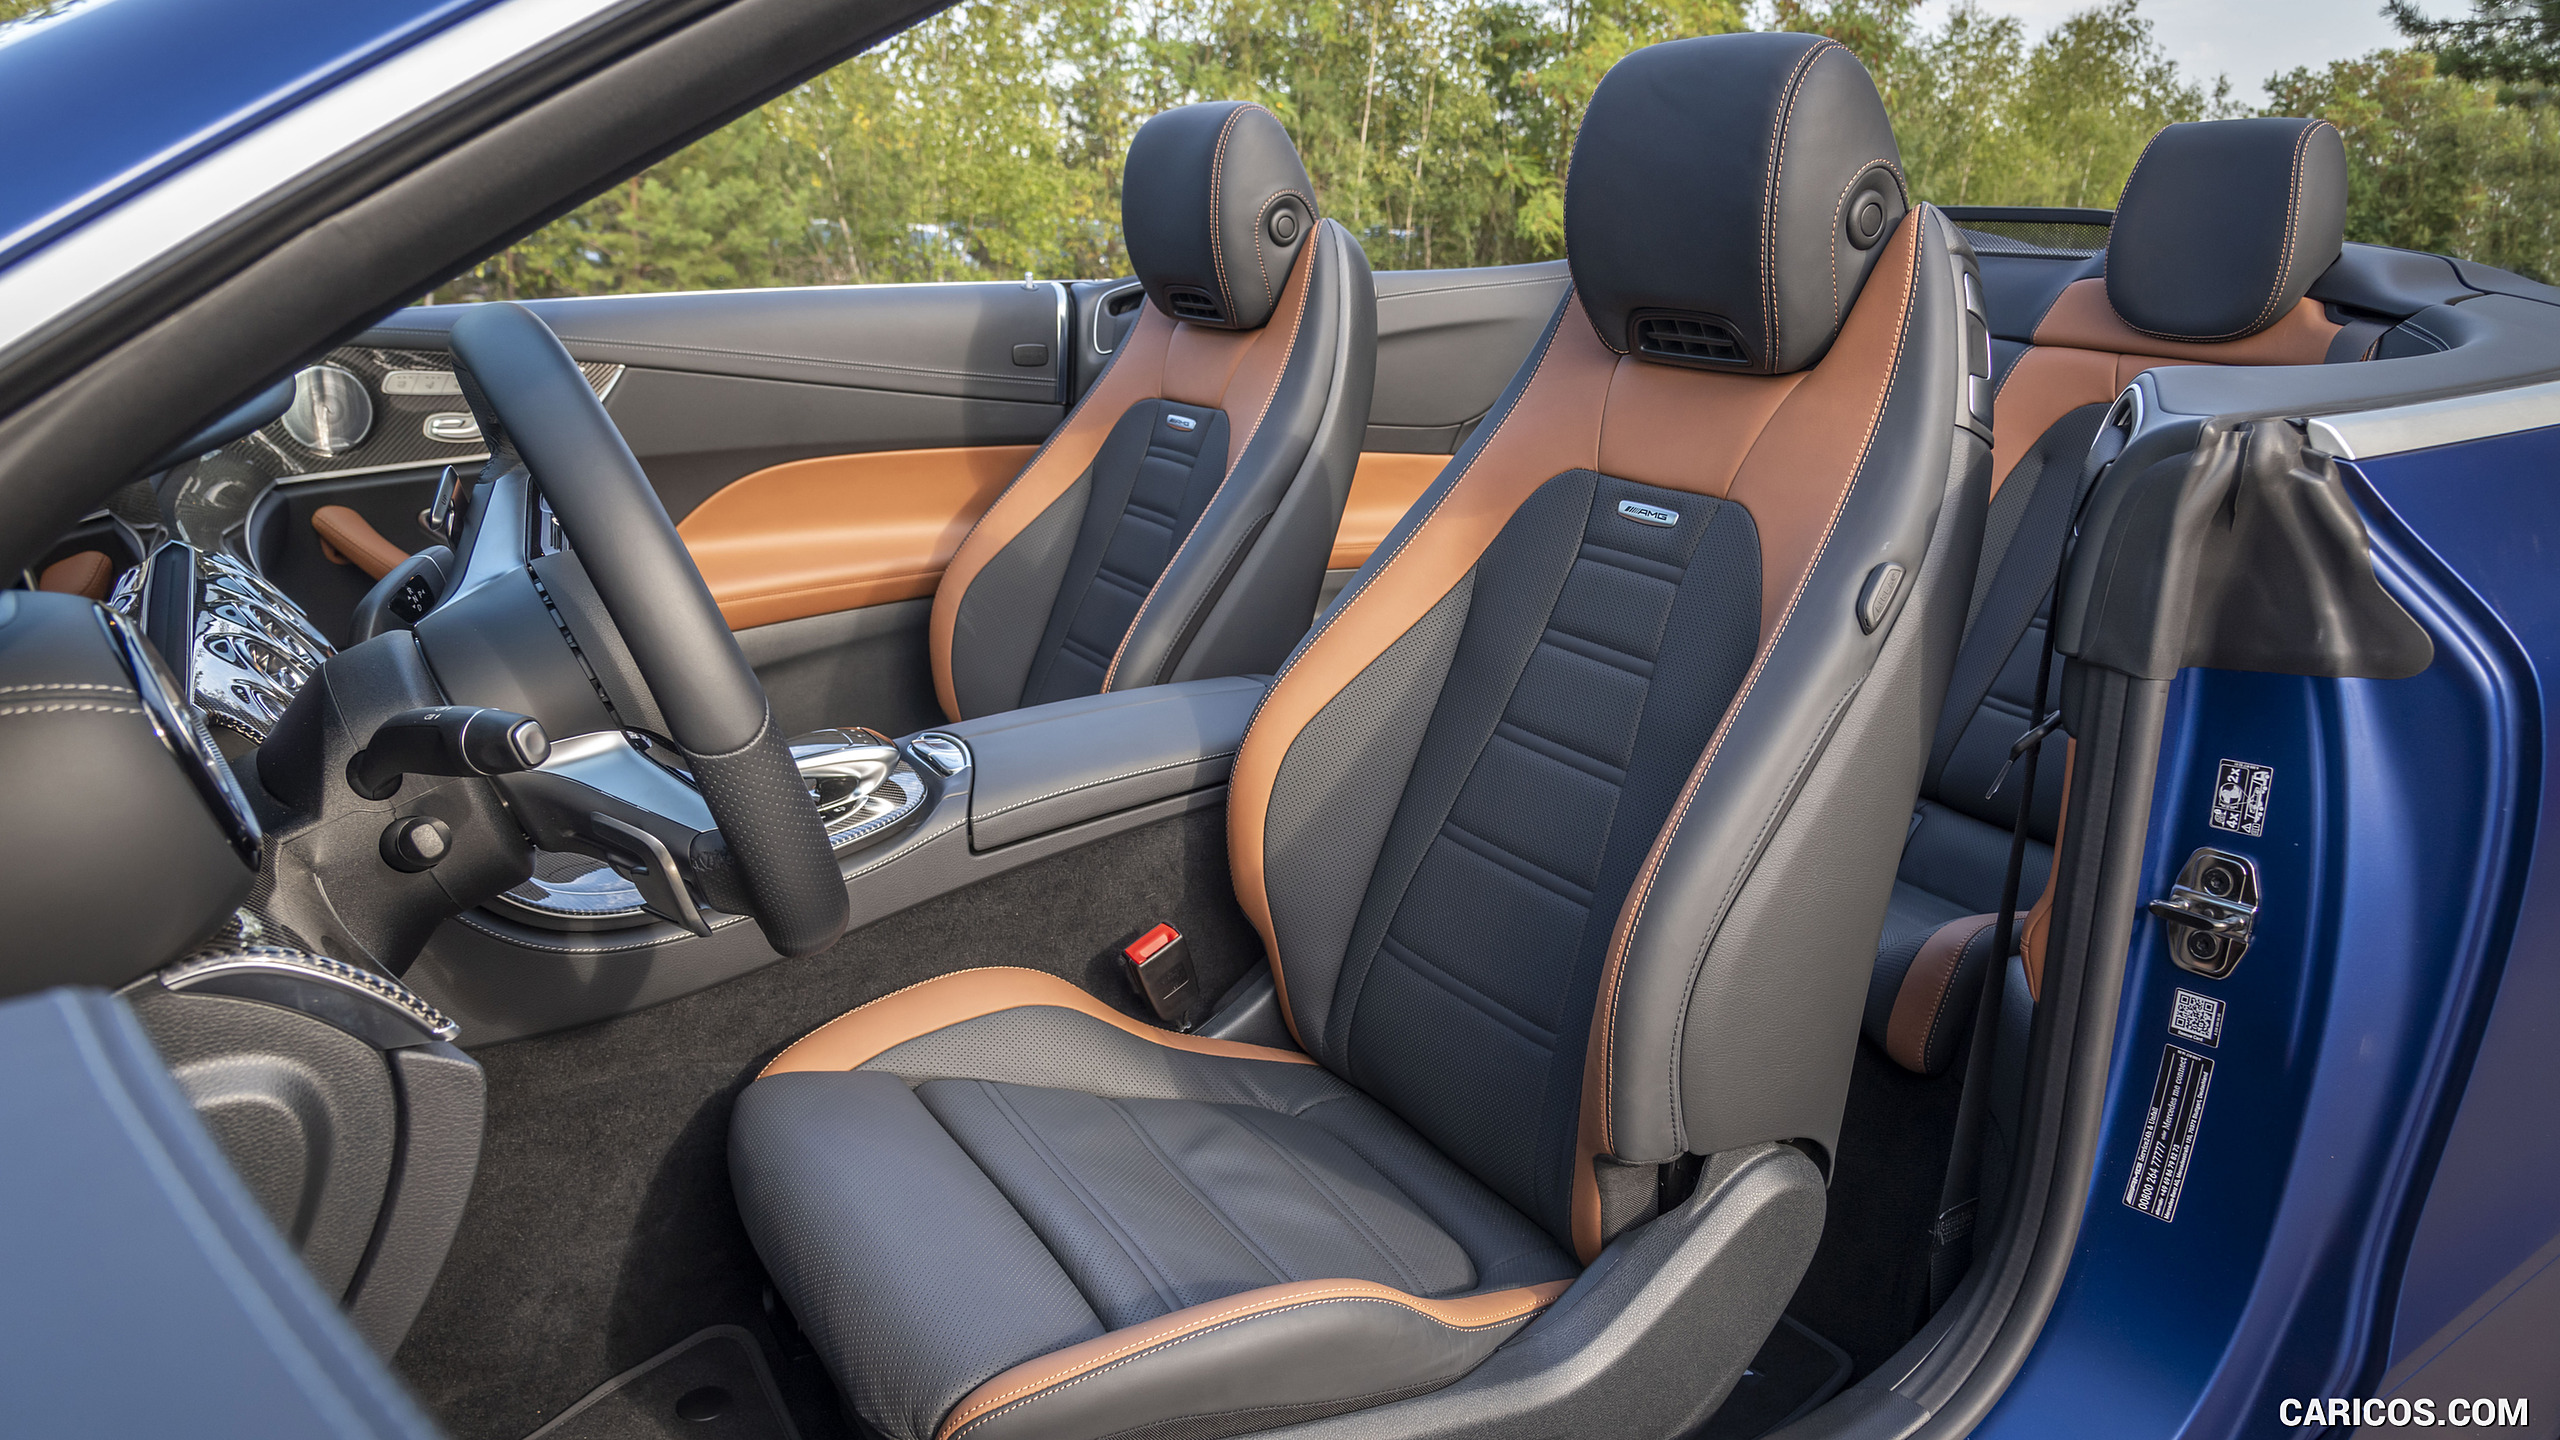 2021 Mercedes-AMG E 53 4MATIC+ Cabriolet - Interior, Front Seats, #94 of 166